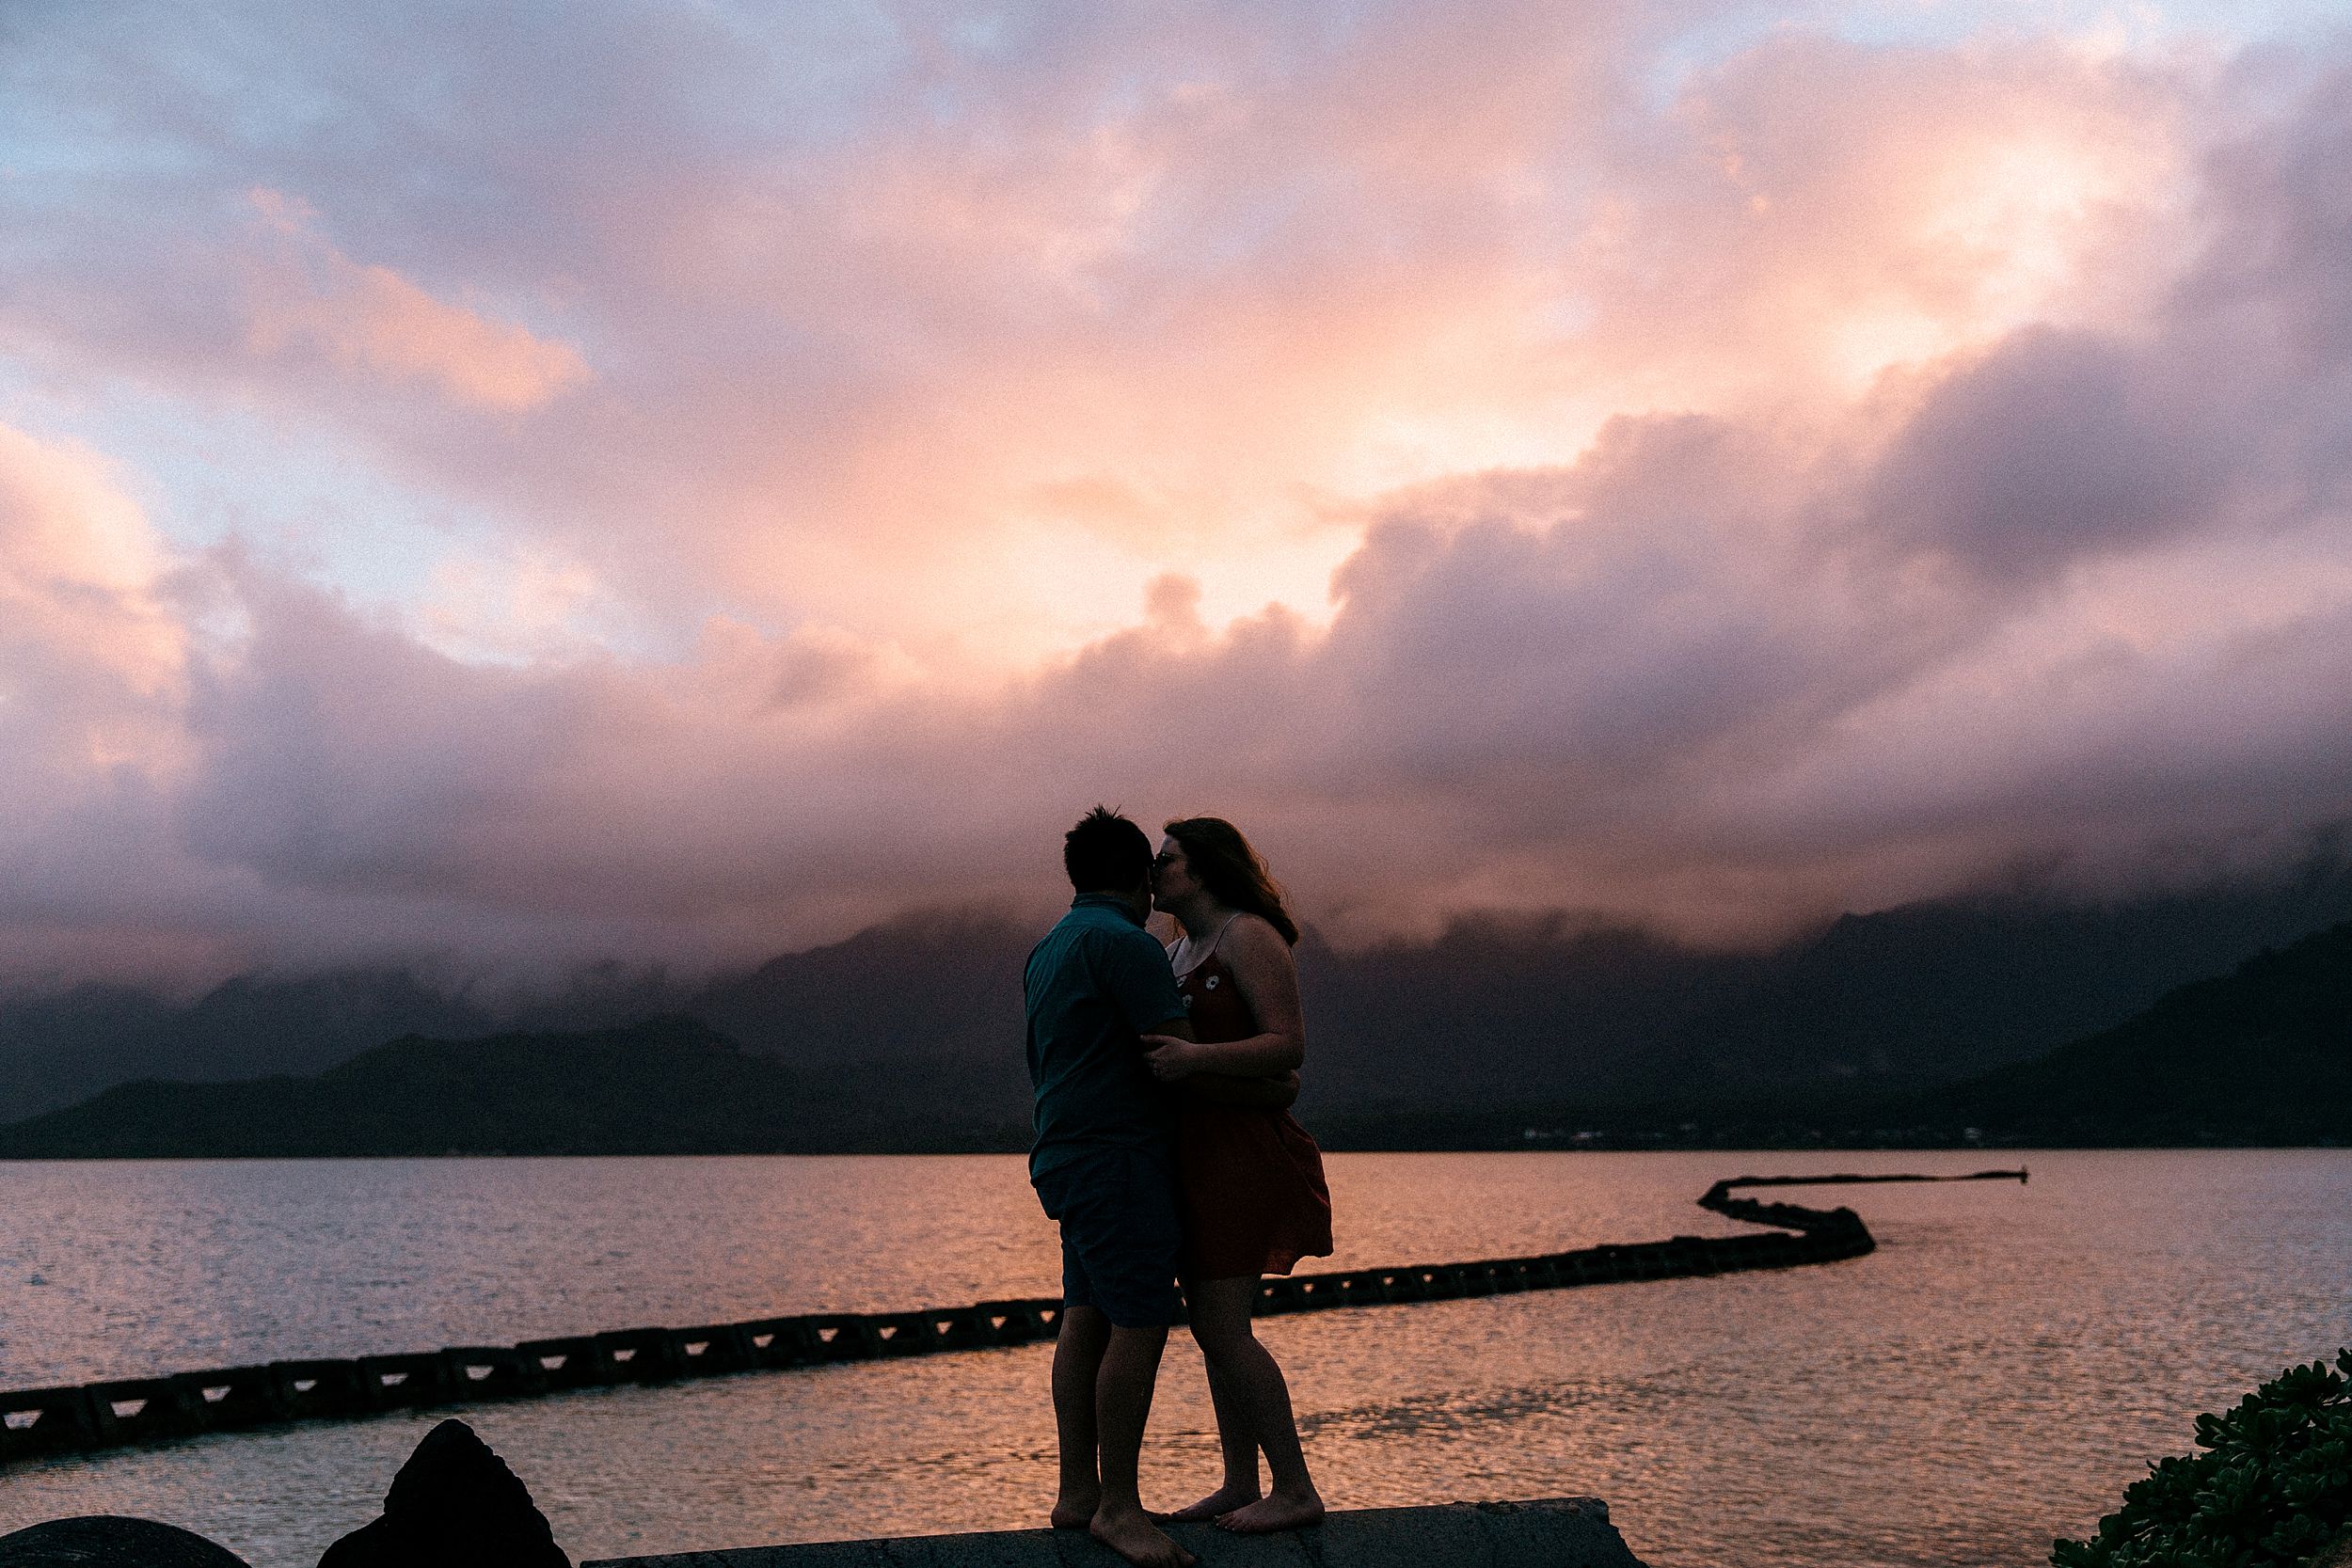 Sweet Engagement Session at Chinaman's Hat, North Shore Oahu